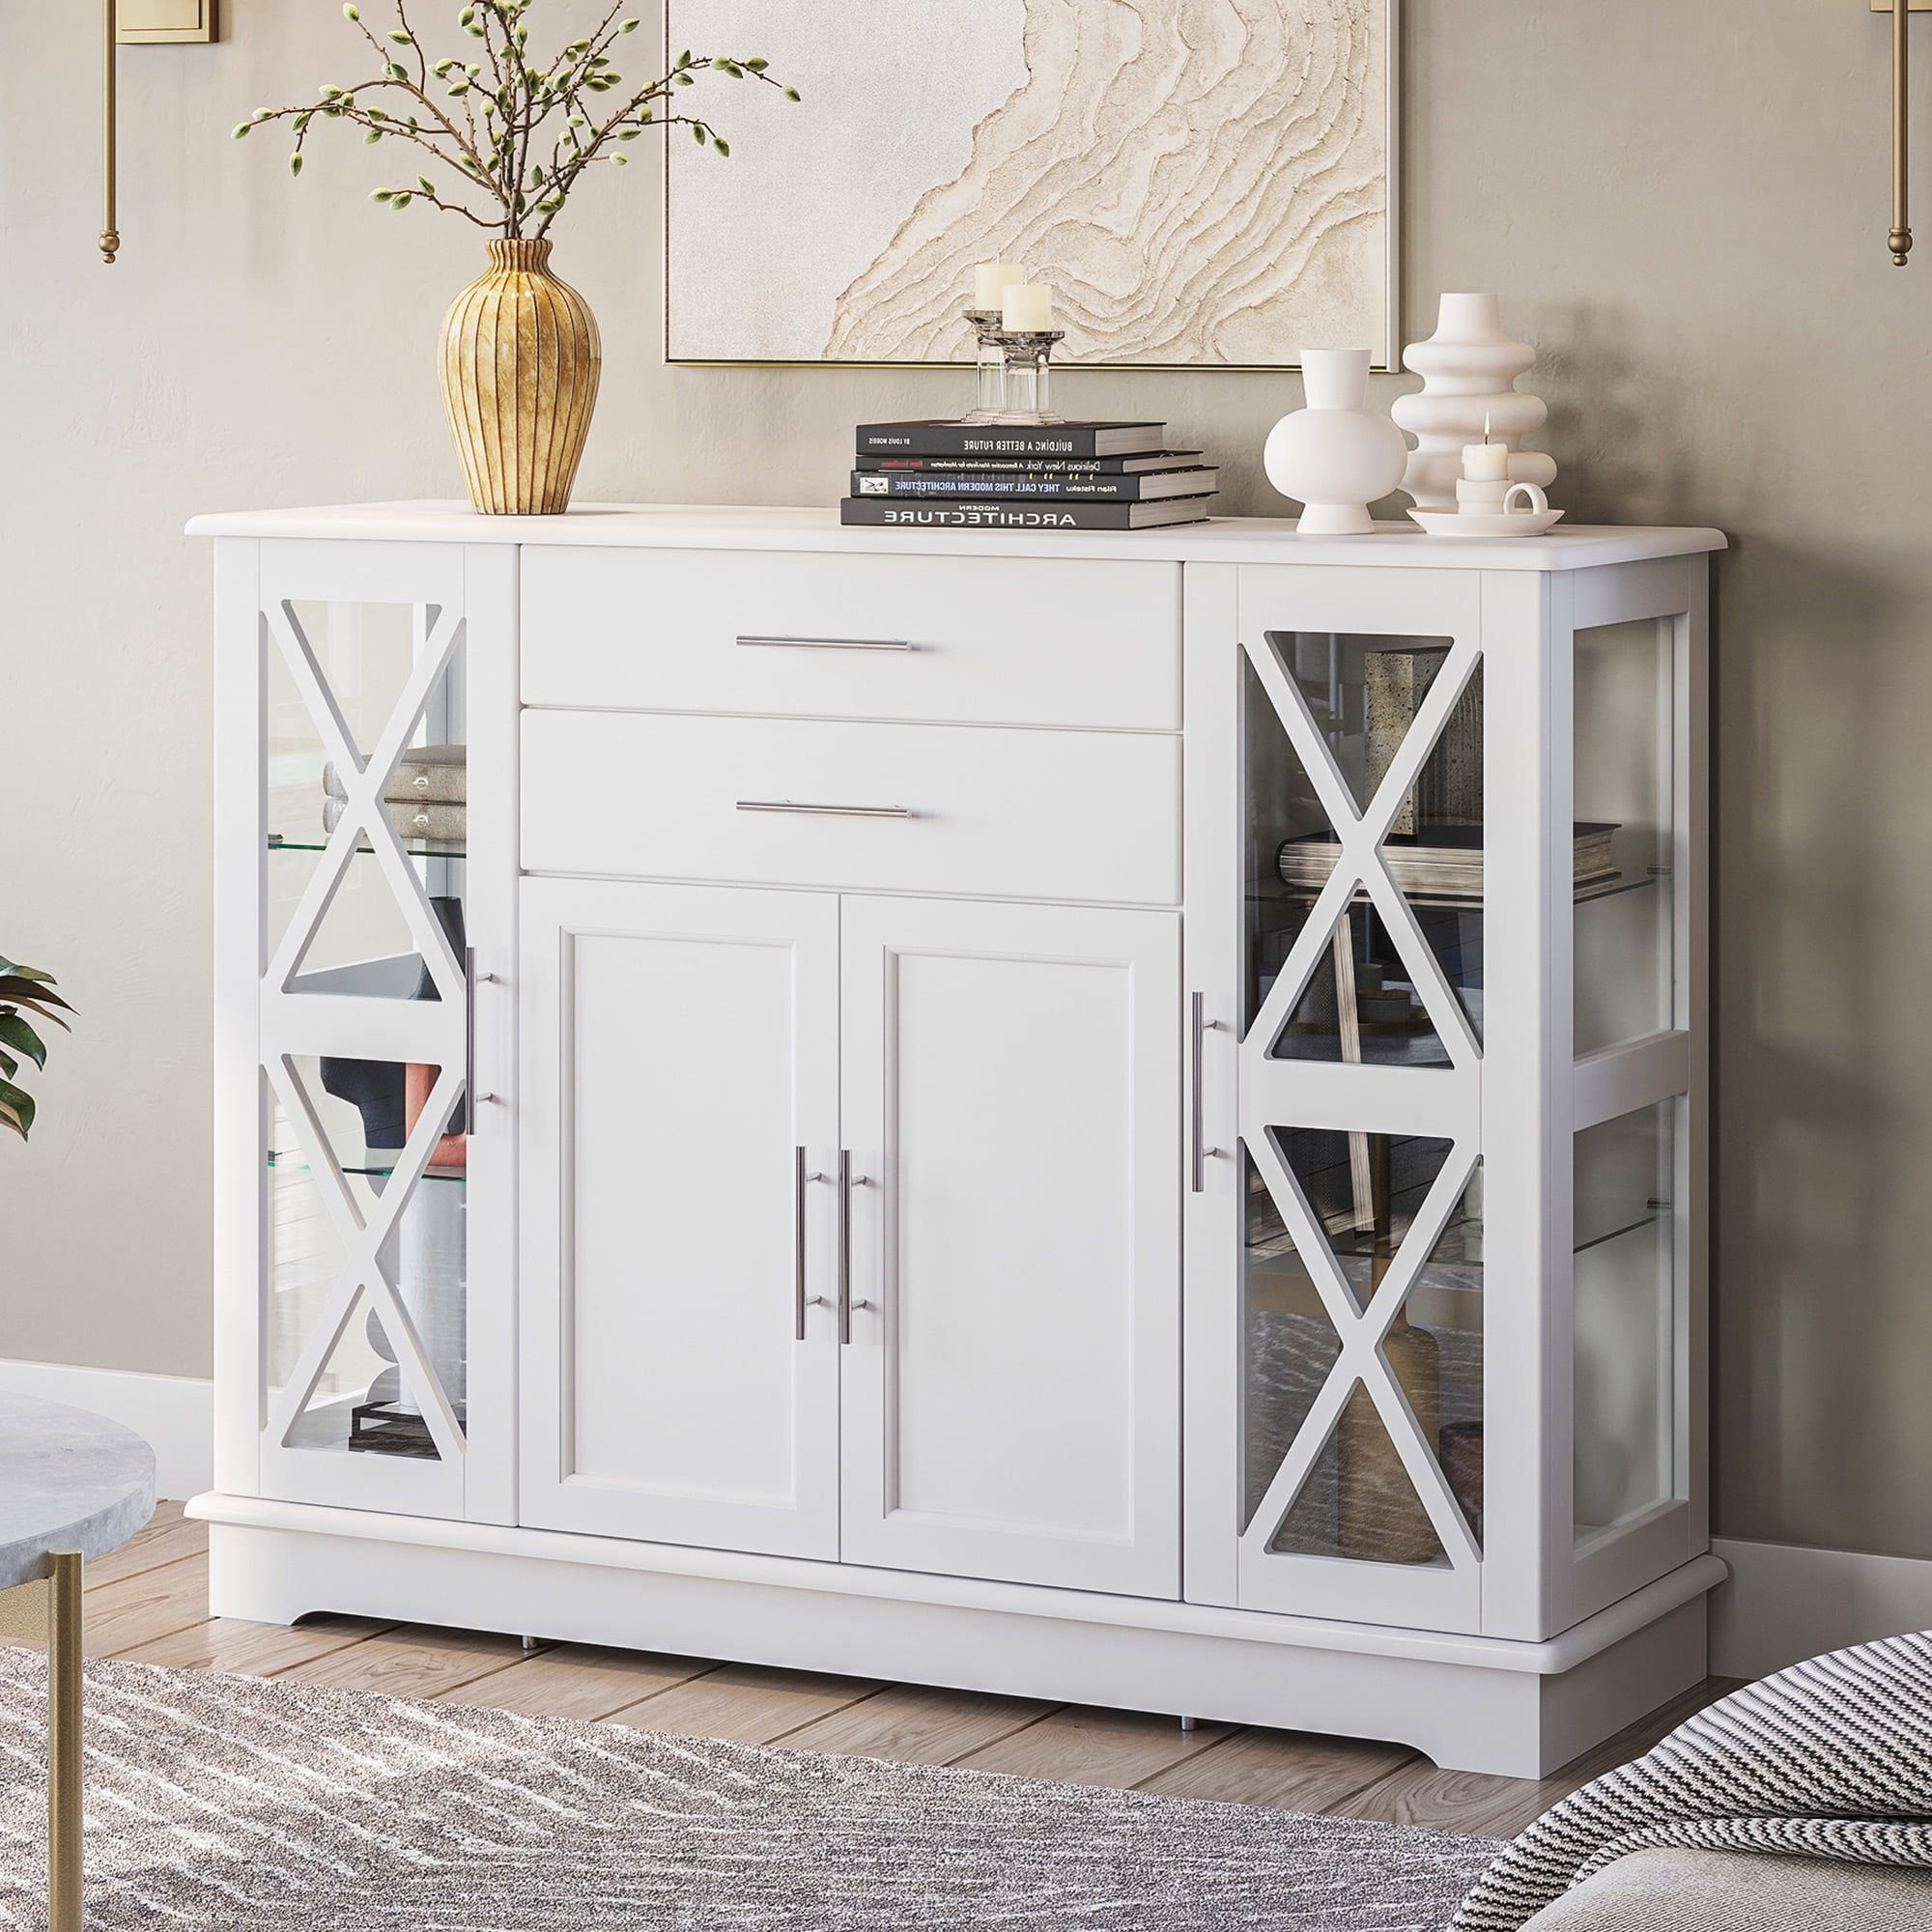 Antique Storage Sideboards With Doors With Regard To Most Recent Belleze Ryland 47" Wood Storage Sideboard Buffet Cabinet Console Table,  White – Walmart (View 13 of 15)